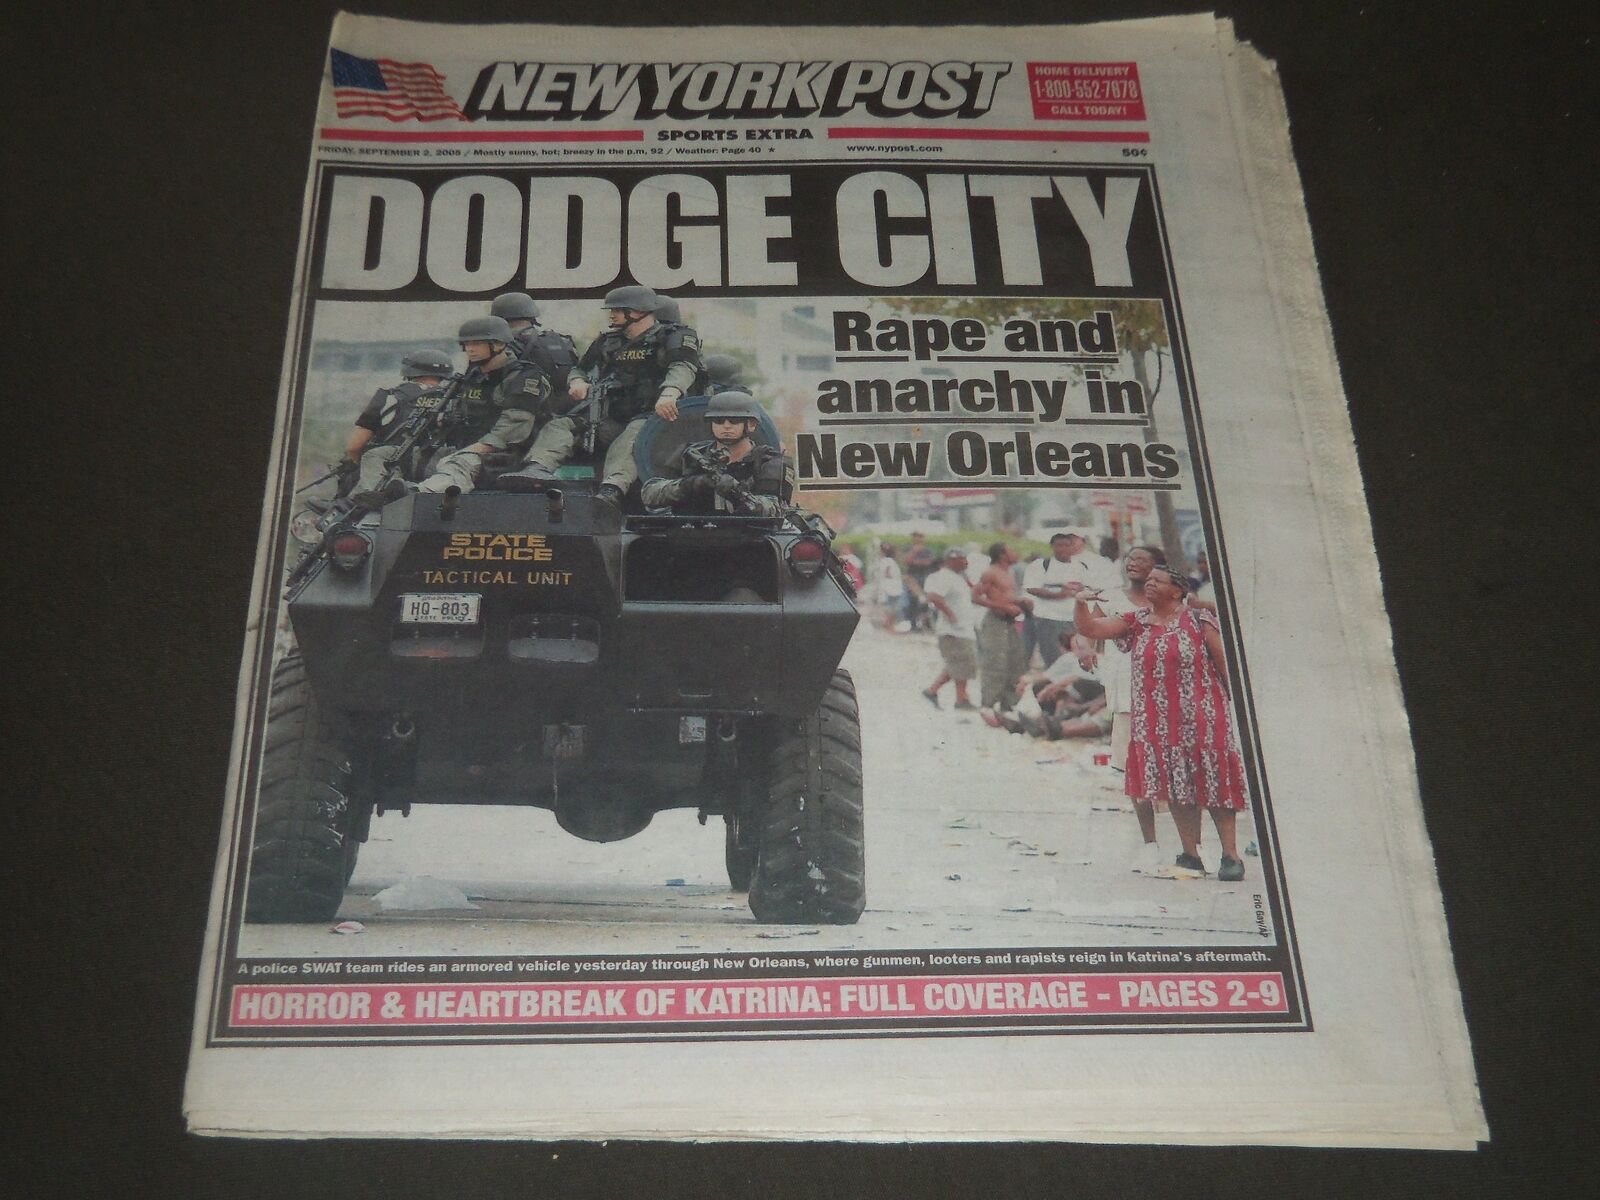 2005 SEPT 2 NEW YORK POST - DODGE CITY ANARCHY IN NEW ORLEANS - NP 2598